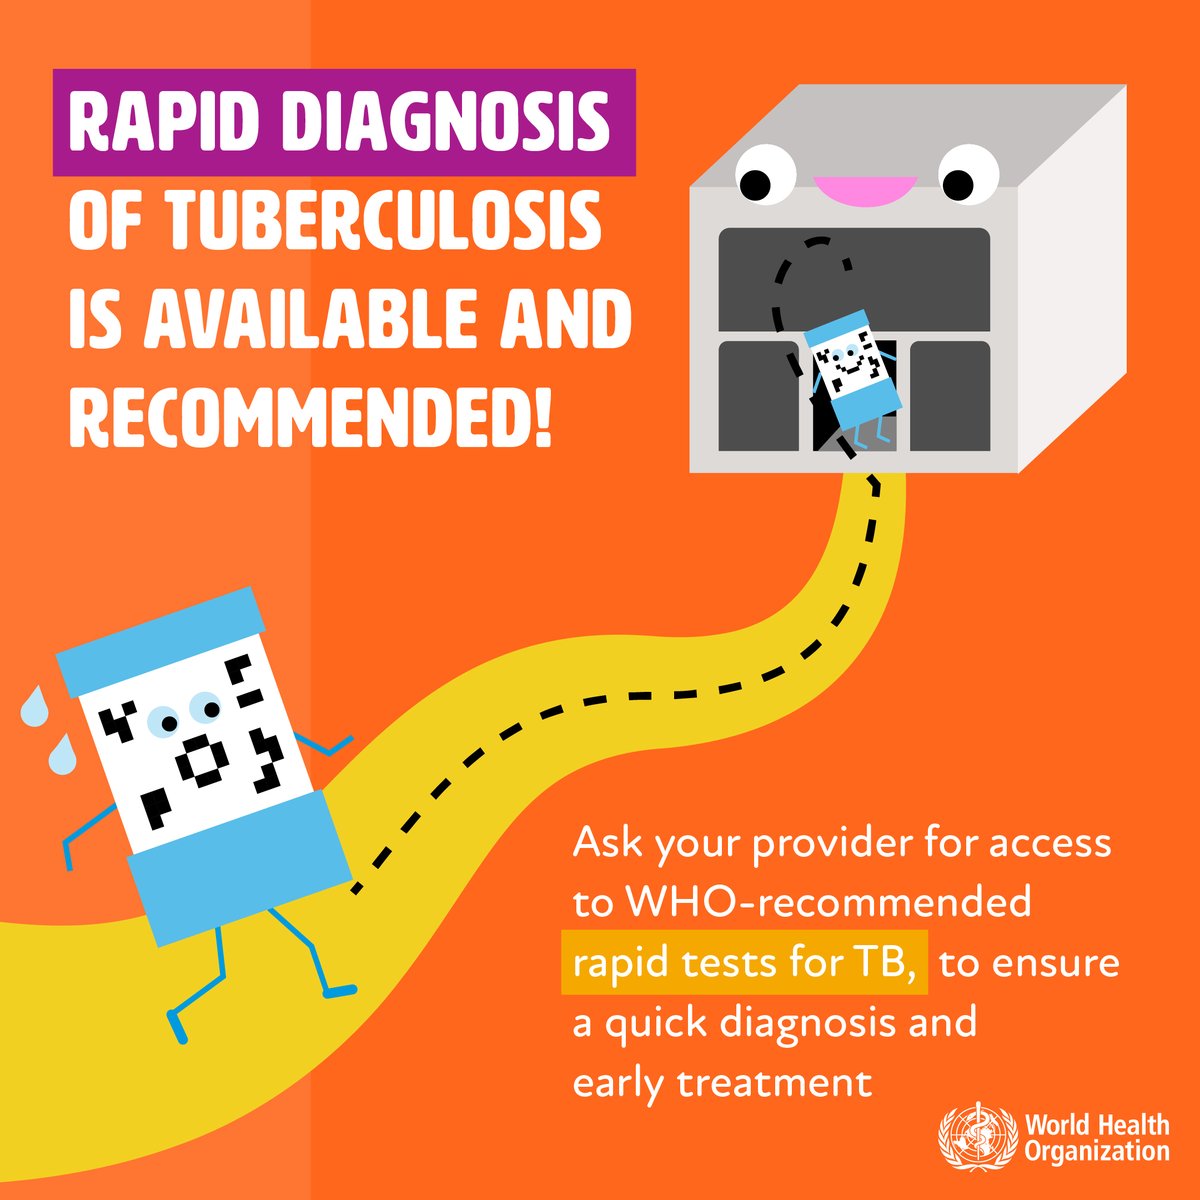 WHO recommends the use of rapid tests such as Xpert MTB/RIF Ultra & Truenat assays as the initial diagnostic test in all persons w/ #TB signs & symptoms. These tests have high diagnostic accuracy & will lead to major improvements in the early detection of TB & drug-resistant TB.